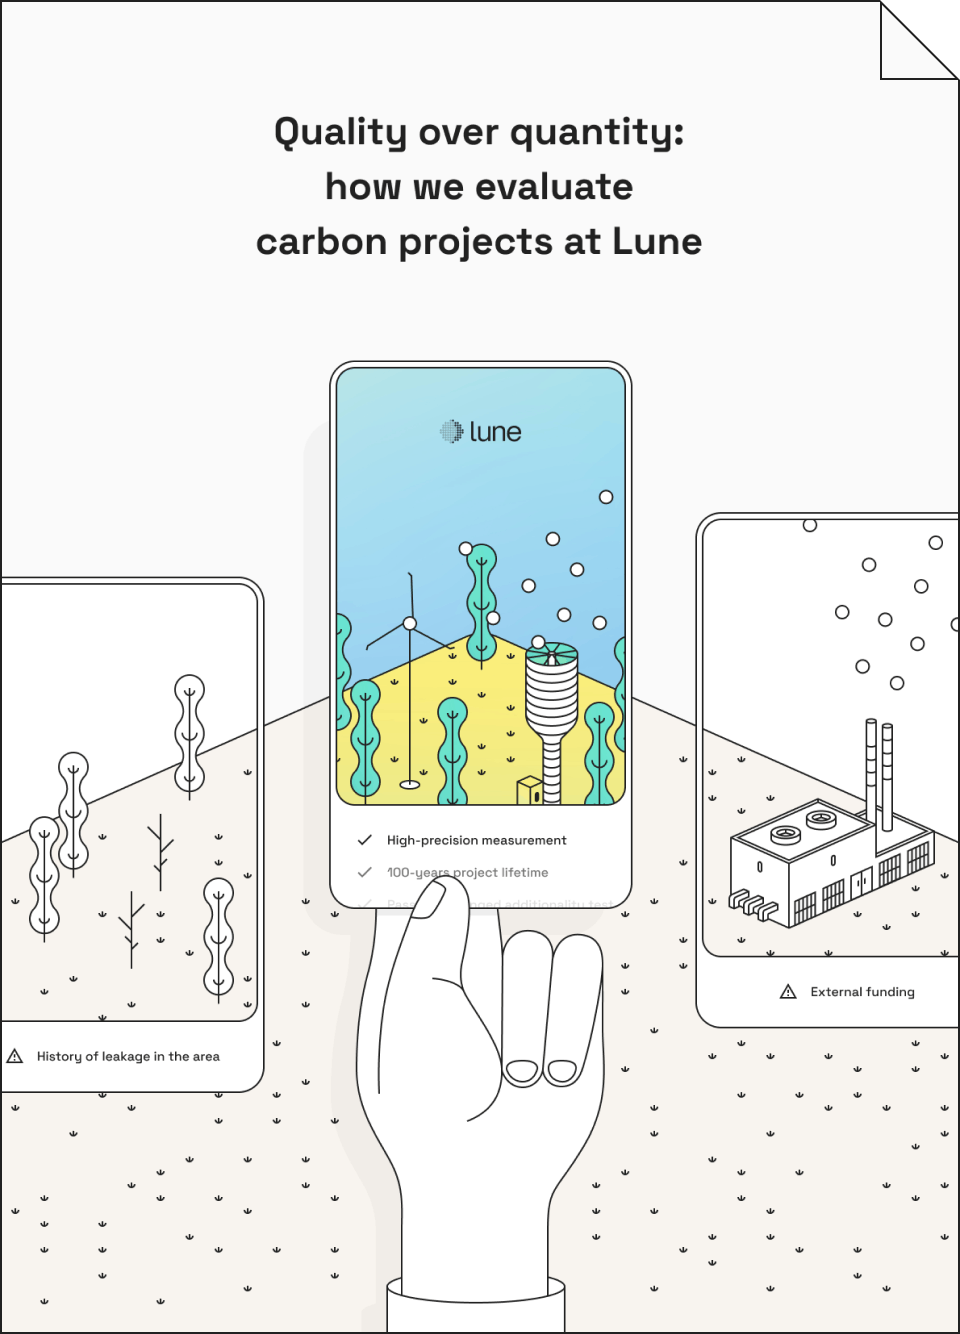 Quality over quantity: how we evaluate climate projects at Lune